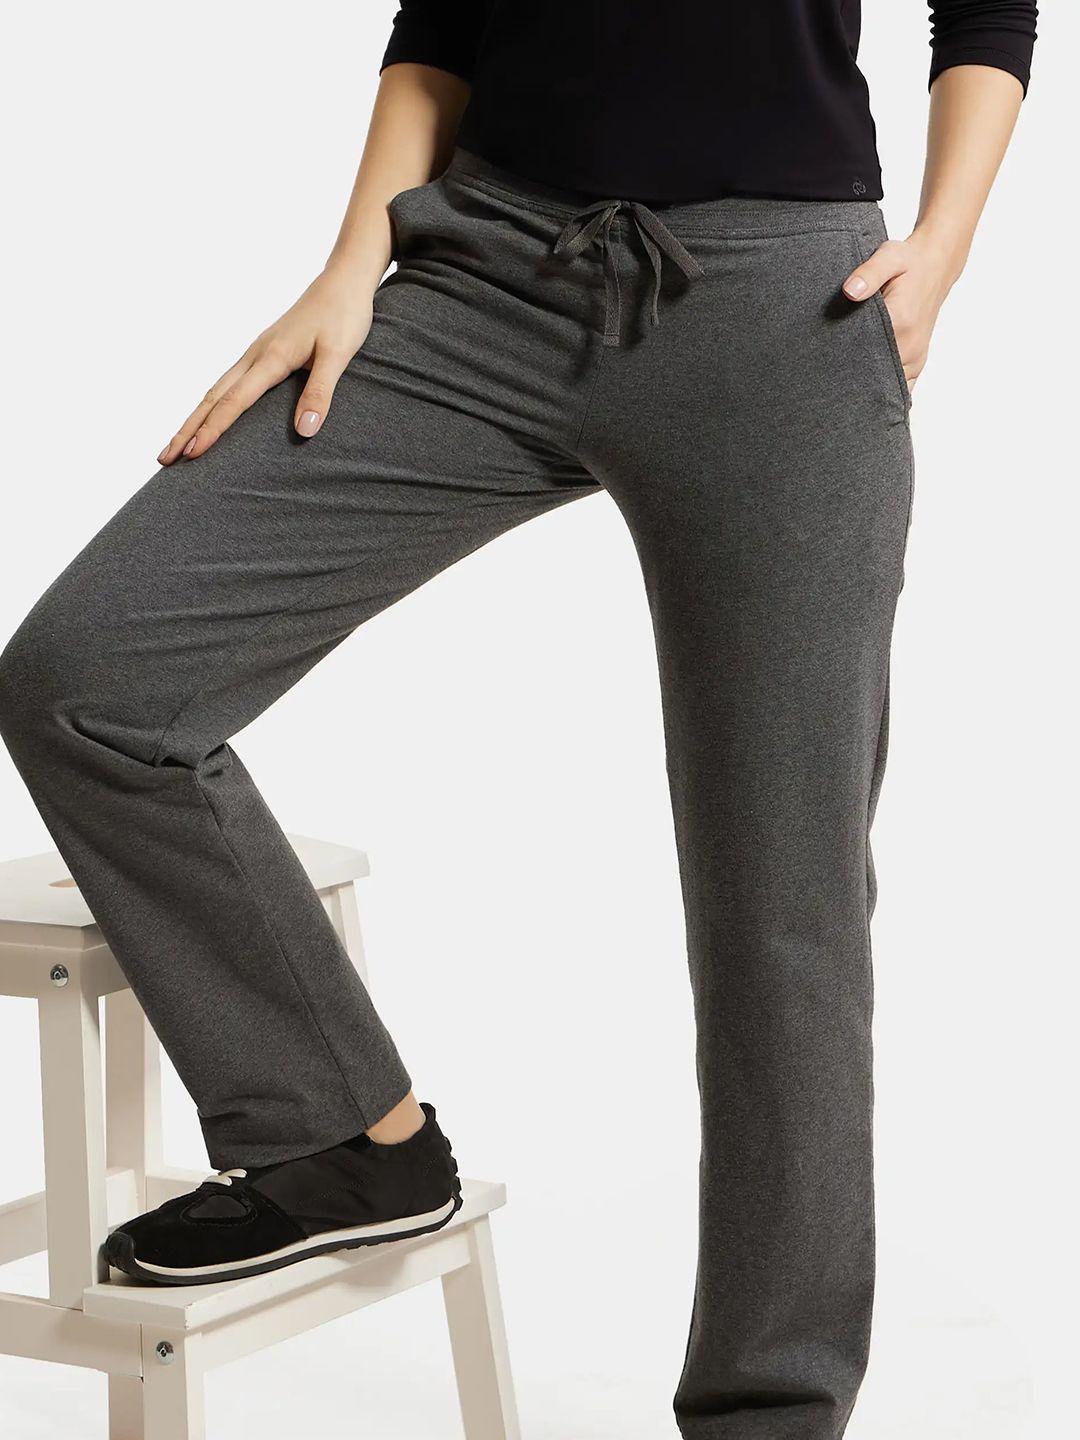 jockey-women-grey-solid-relaxed-fit-cotton-track-pants